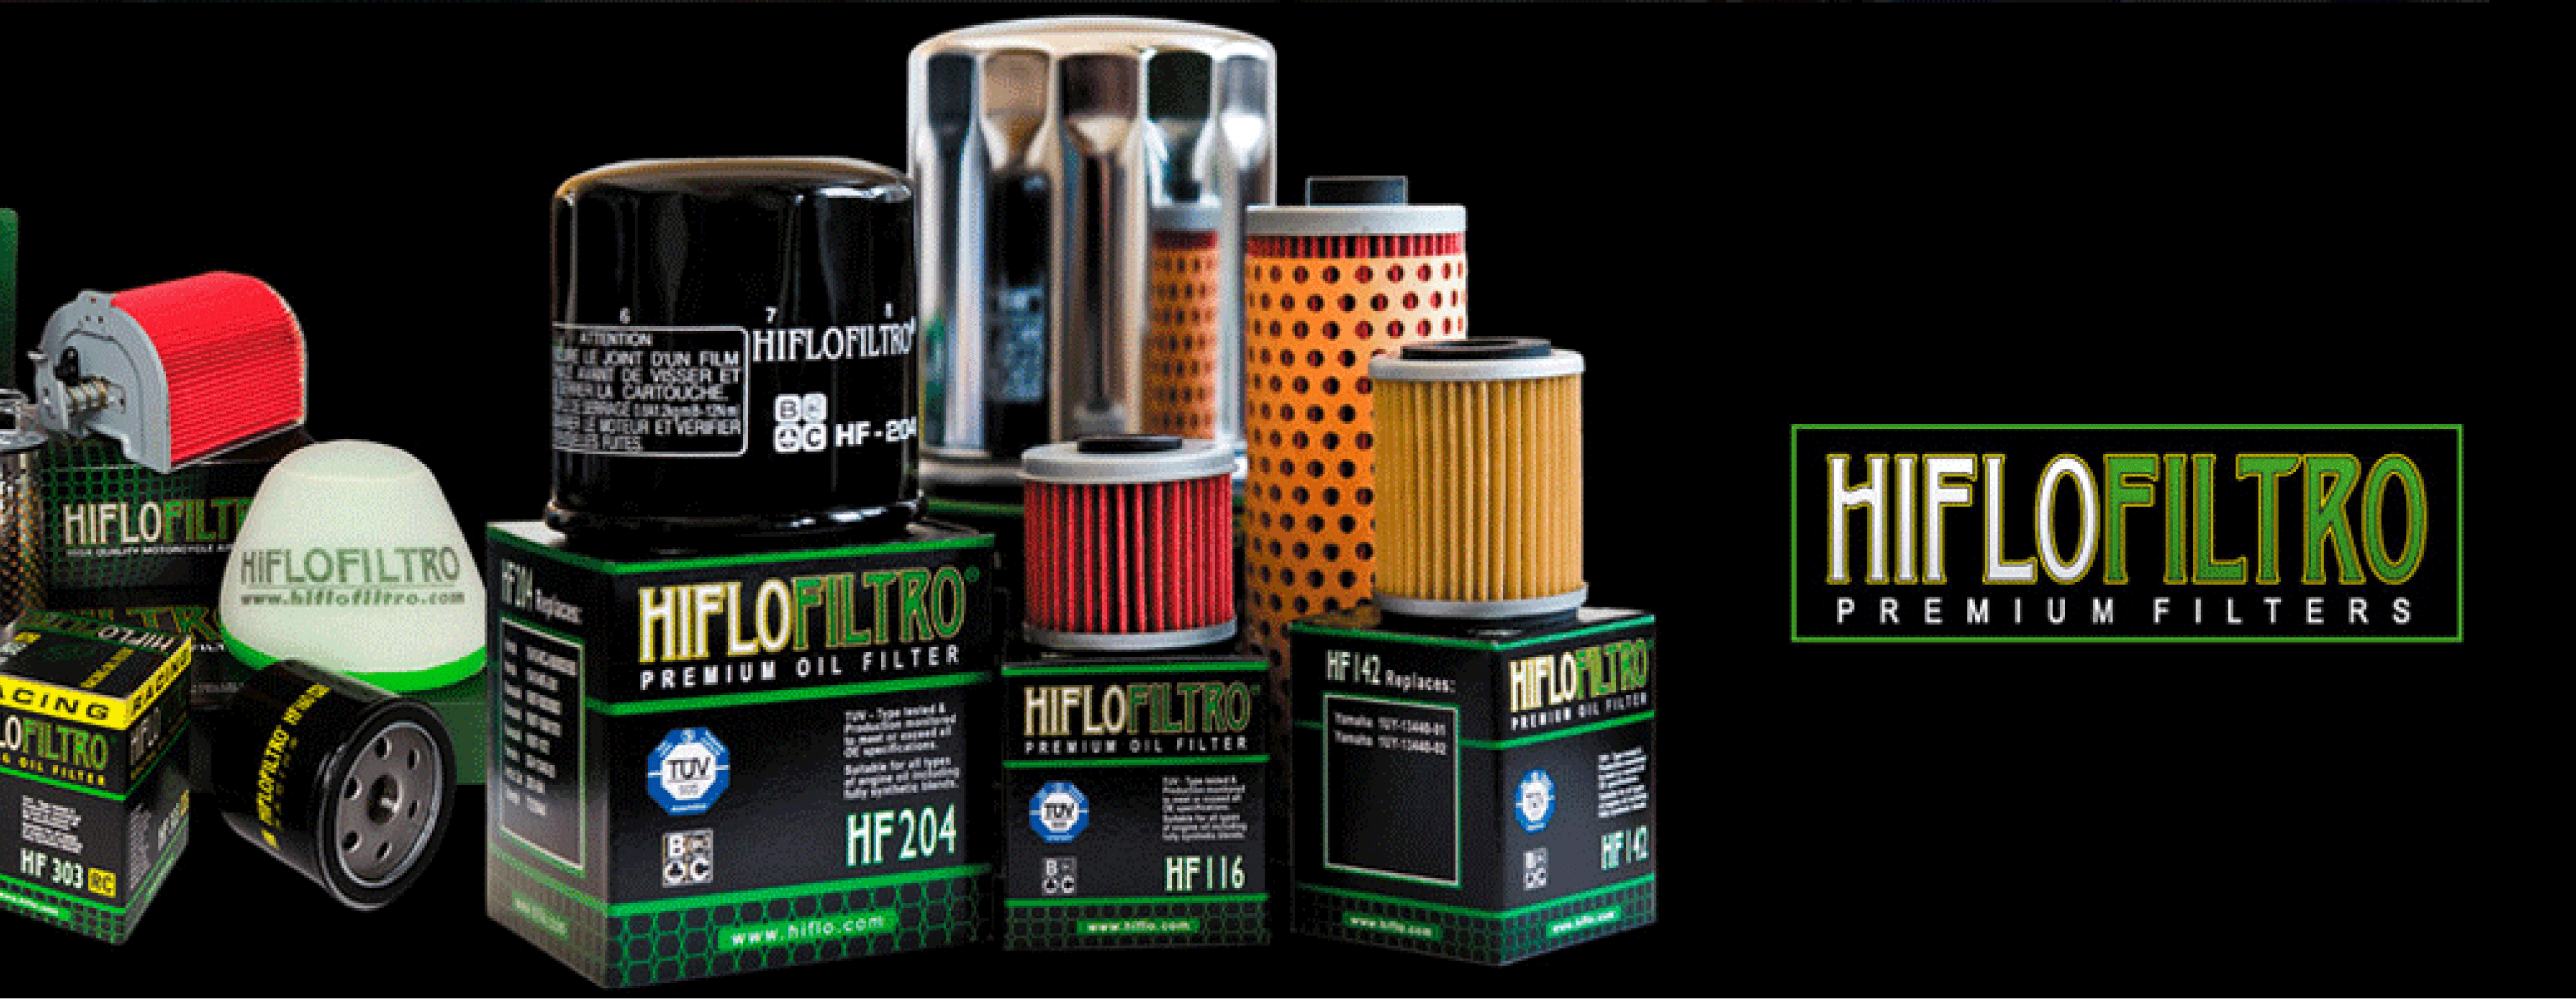 Hiflofiltro is the complete range of oil and air filters for motorcycles, scooters, ATVs, and watercraft, providing the ultimate level of protection for your engine.